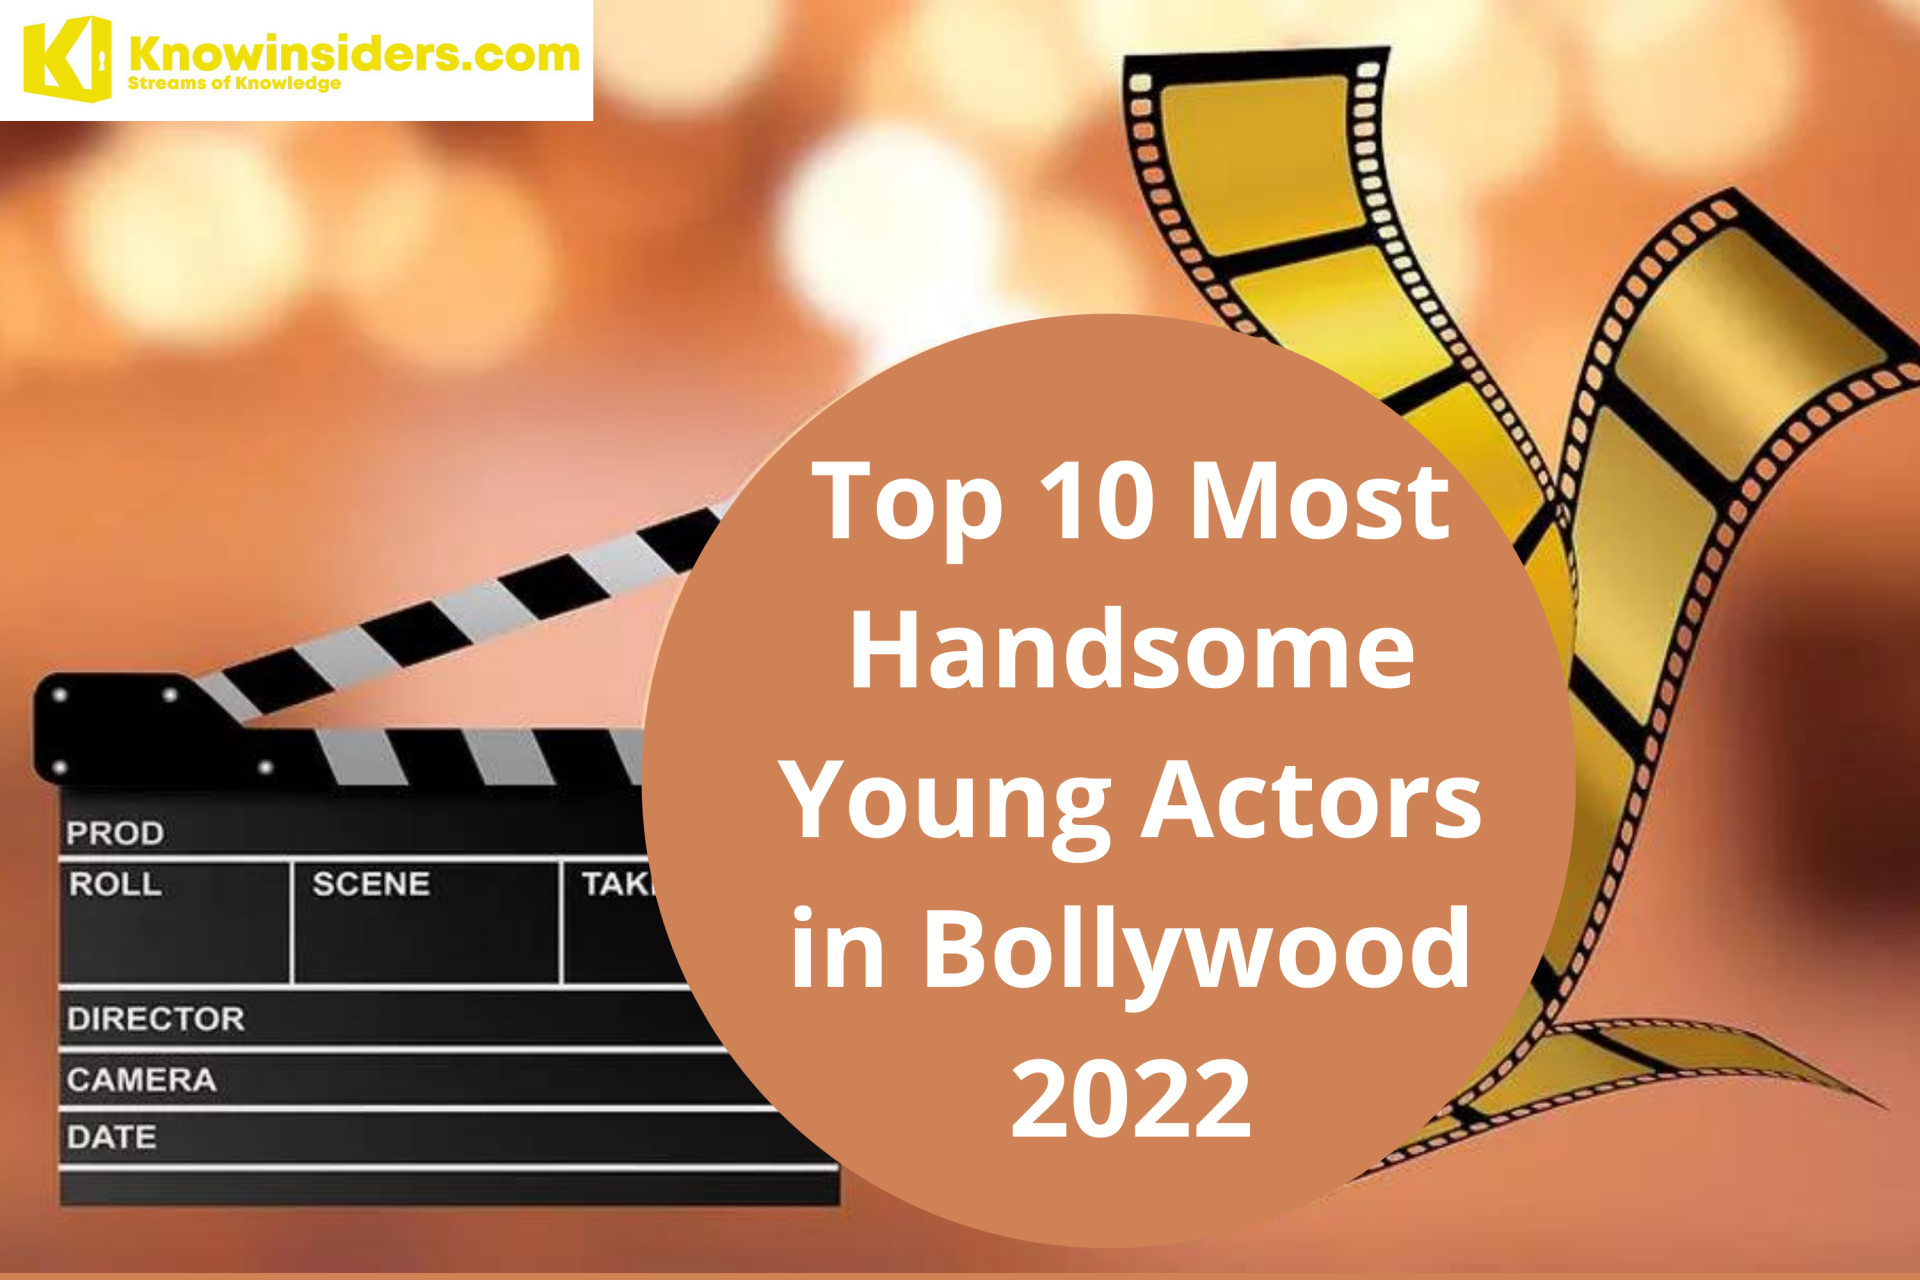 Top 10 Most Handsome & Hottest Young Actors in Bollywood 2022/2023